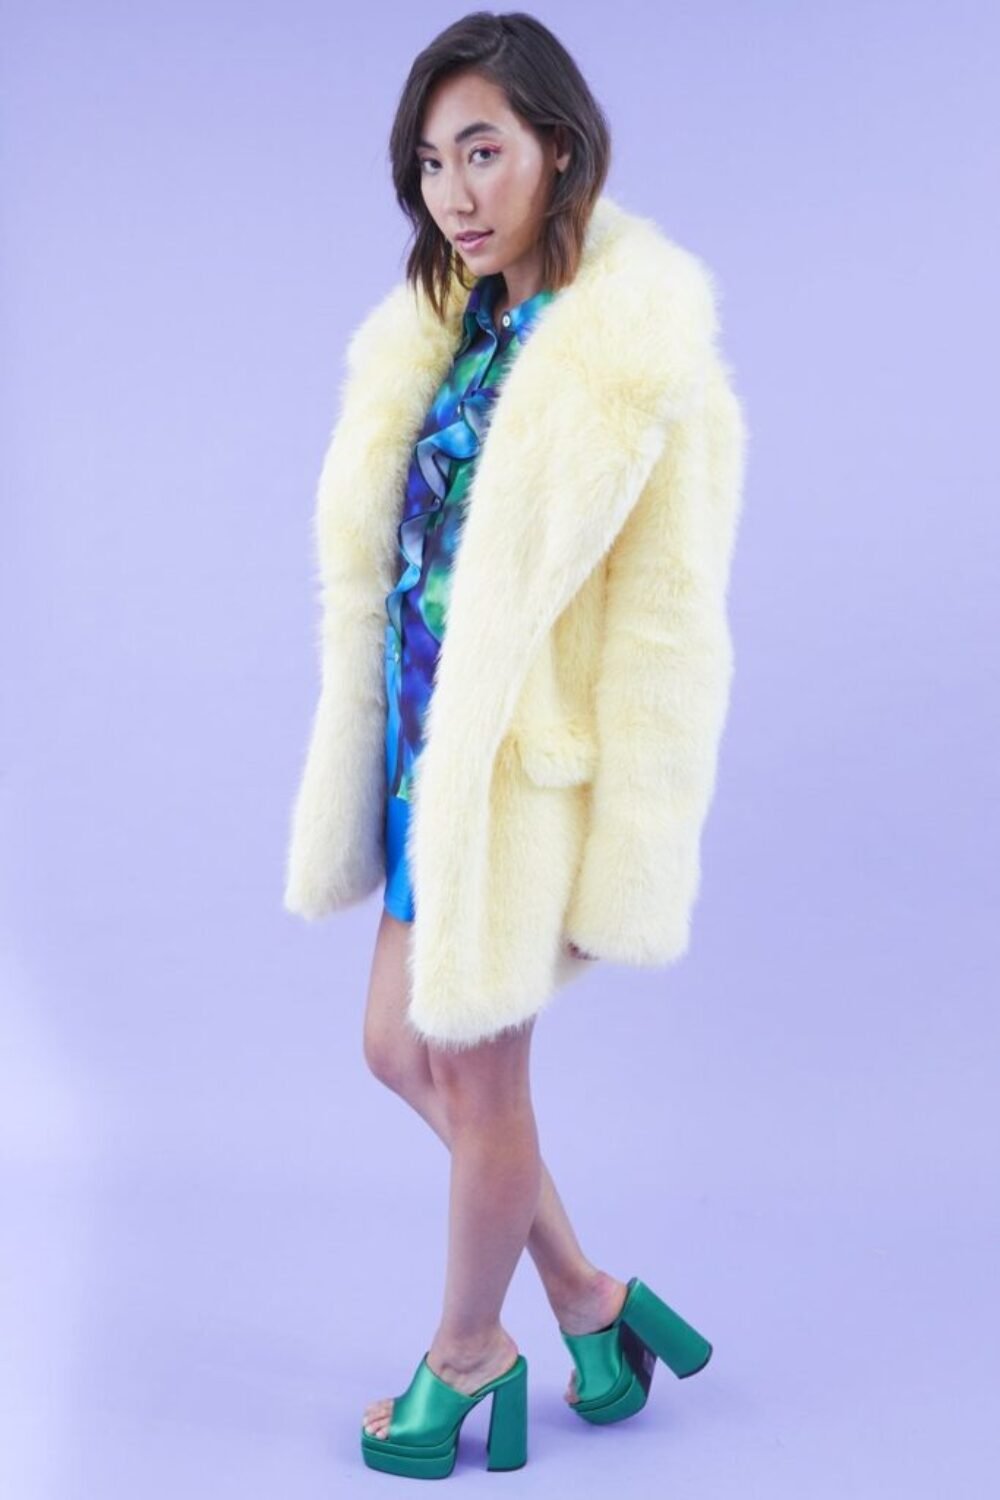 Shop Lux Faux Fur Yellow Midi Coat and women's luxury and designer clothes at www.lux-apparel.co.uk